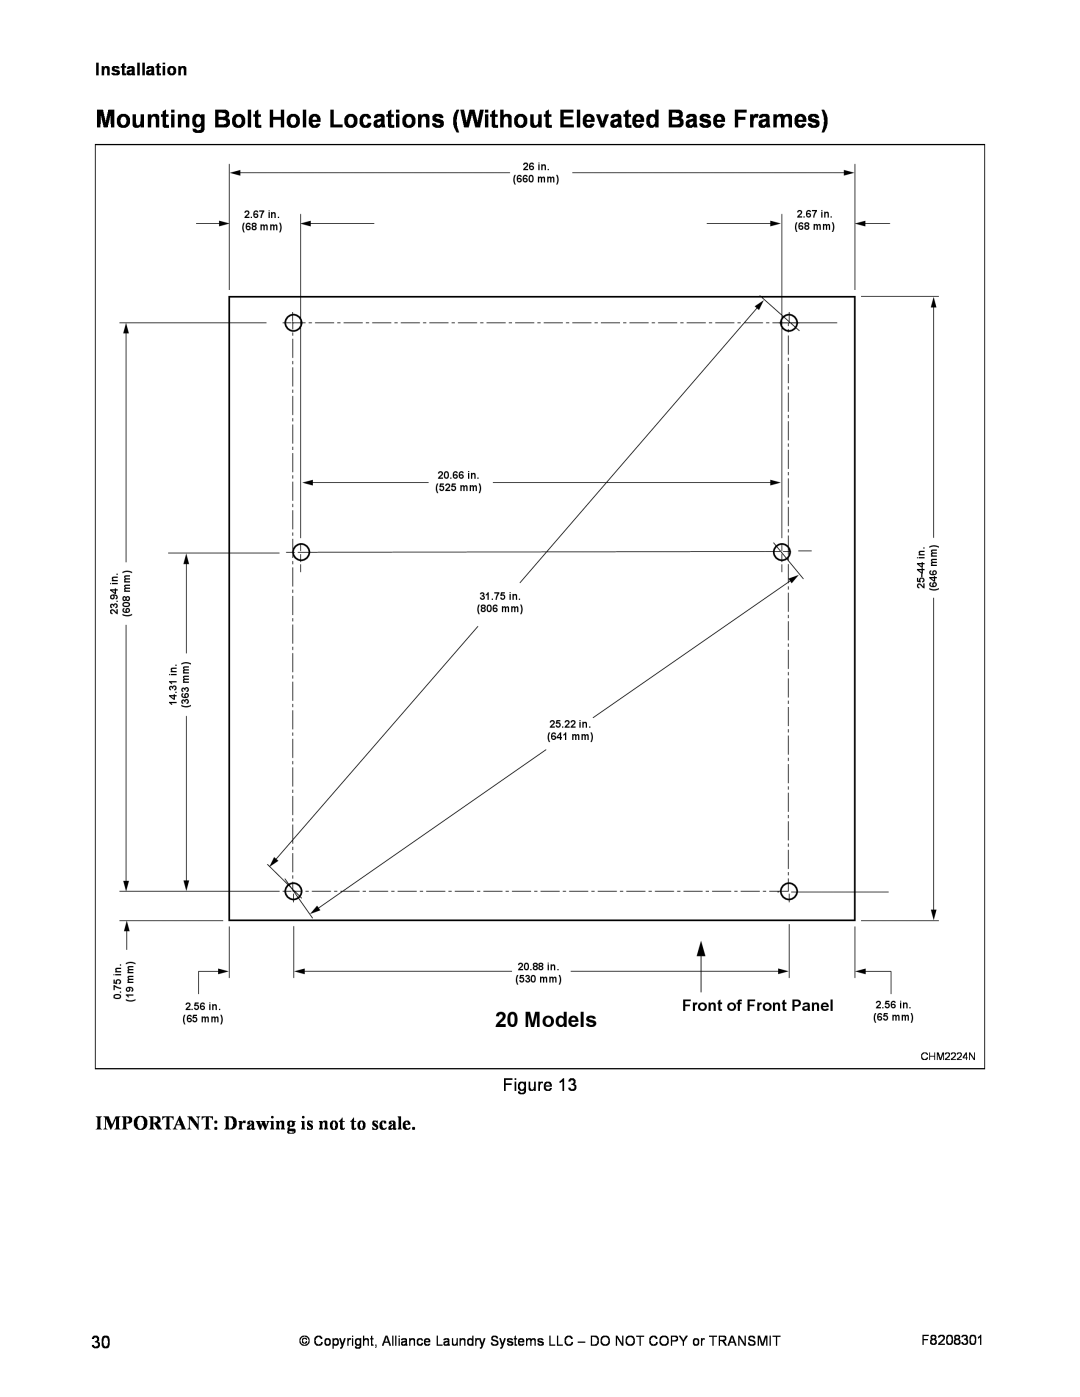 Alliance Laundry Systems CHM1772C manual Mounting Bolt Hole Locations Without Elevated Base Frames, Models, Installation 